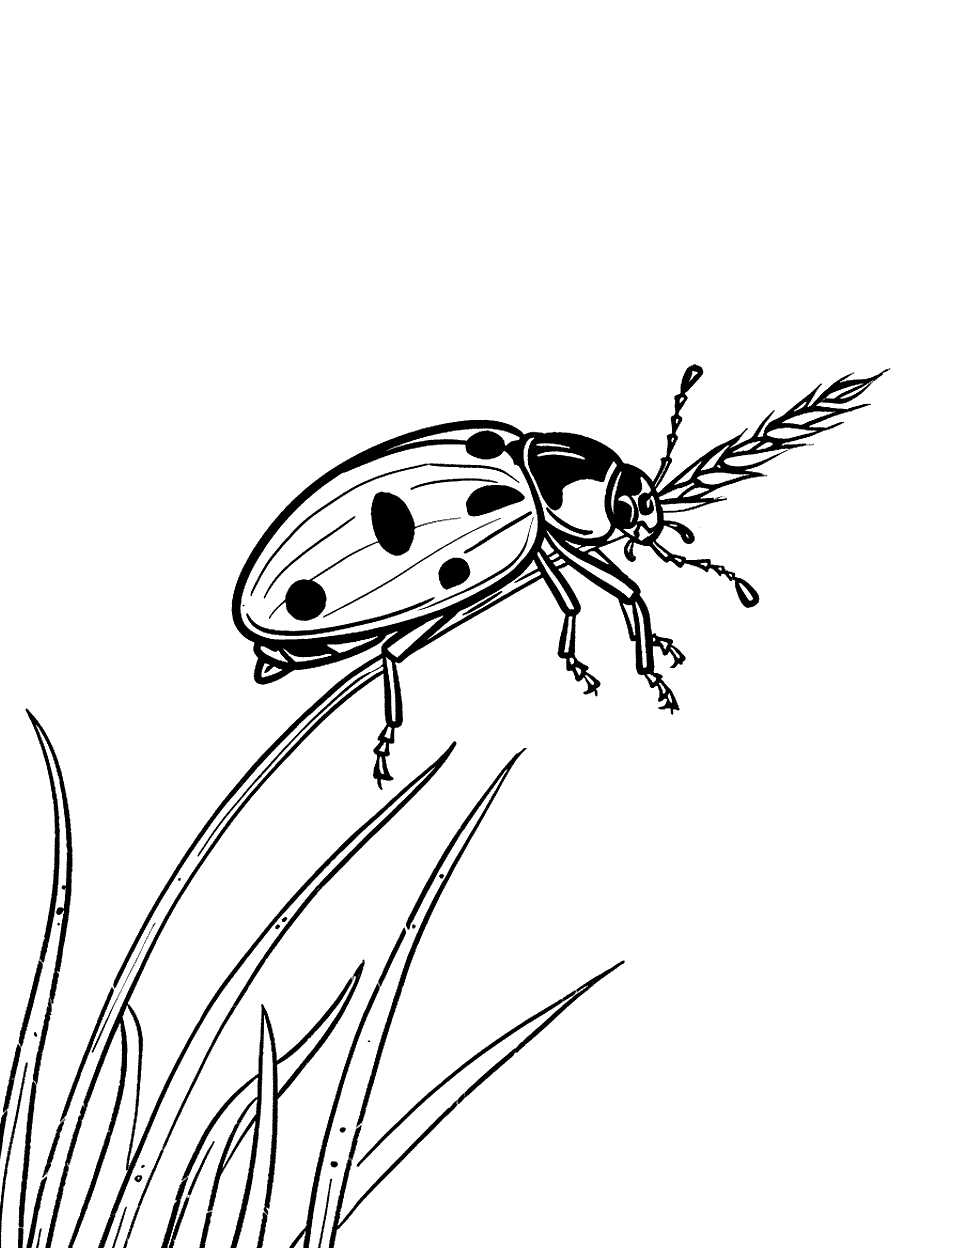 Ladybug Resting on a Blade of Grass Insect Coloring Page - A cute ladybug resting peacefully atop a slender blade of grass.